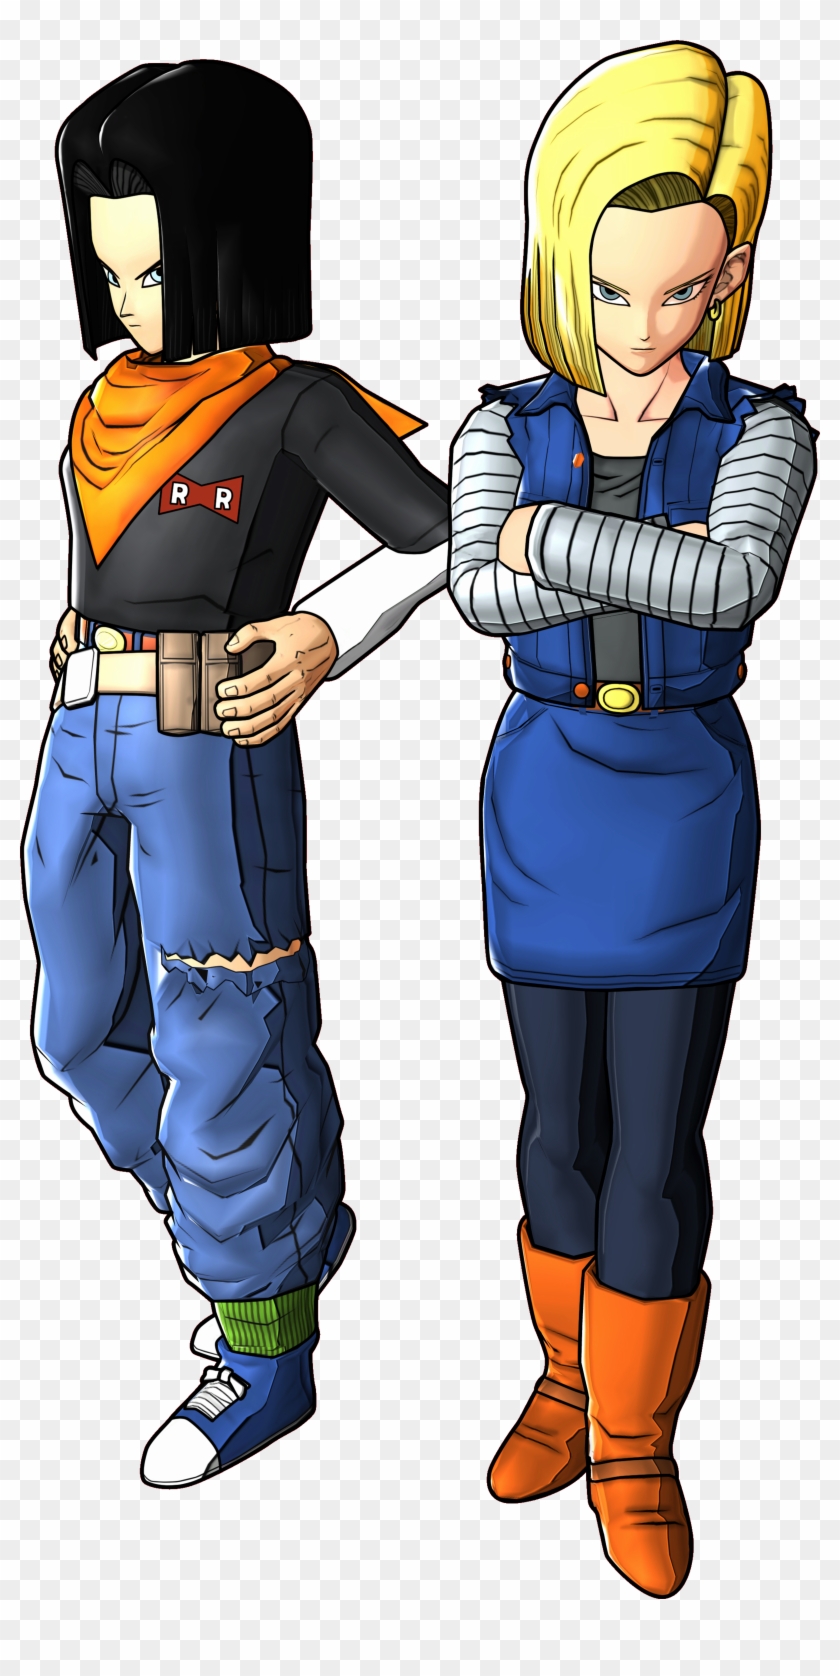 Android18 And 17 Battle Of Z Render Android 18 E 17 Imagens